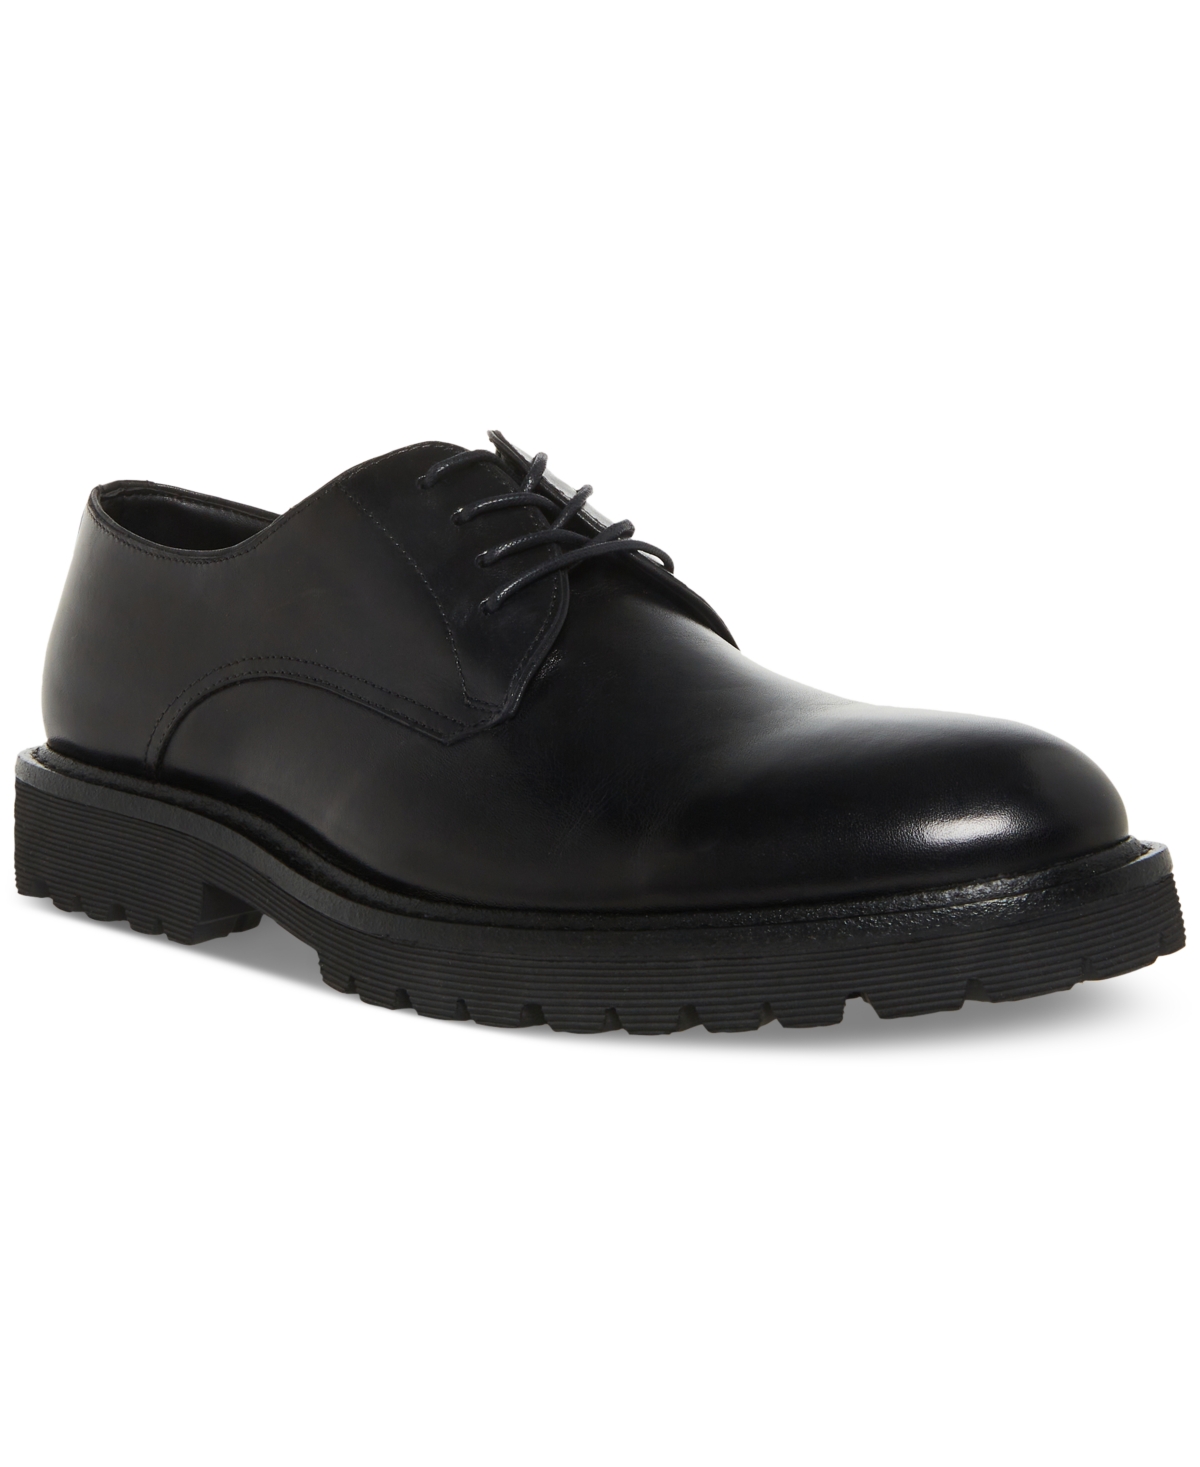 Men's Brodee Leather Lace-Up Derby Shoes - Black